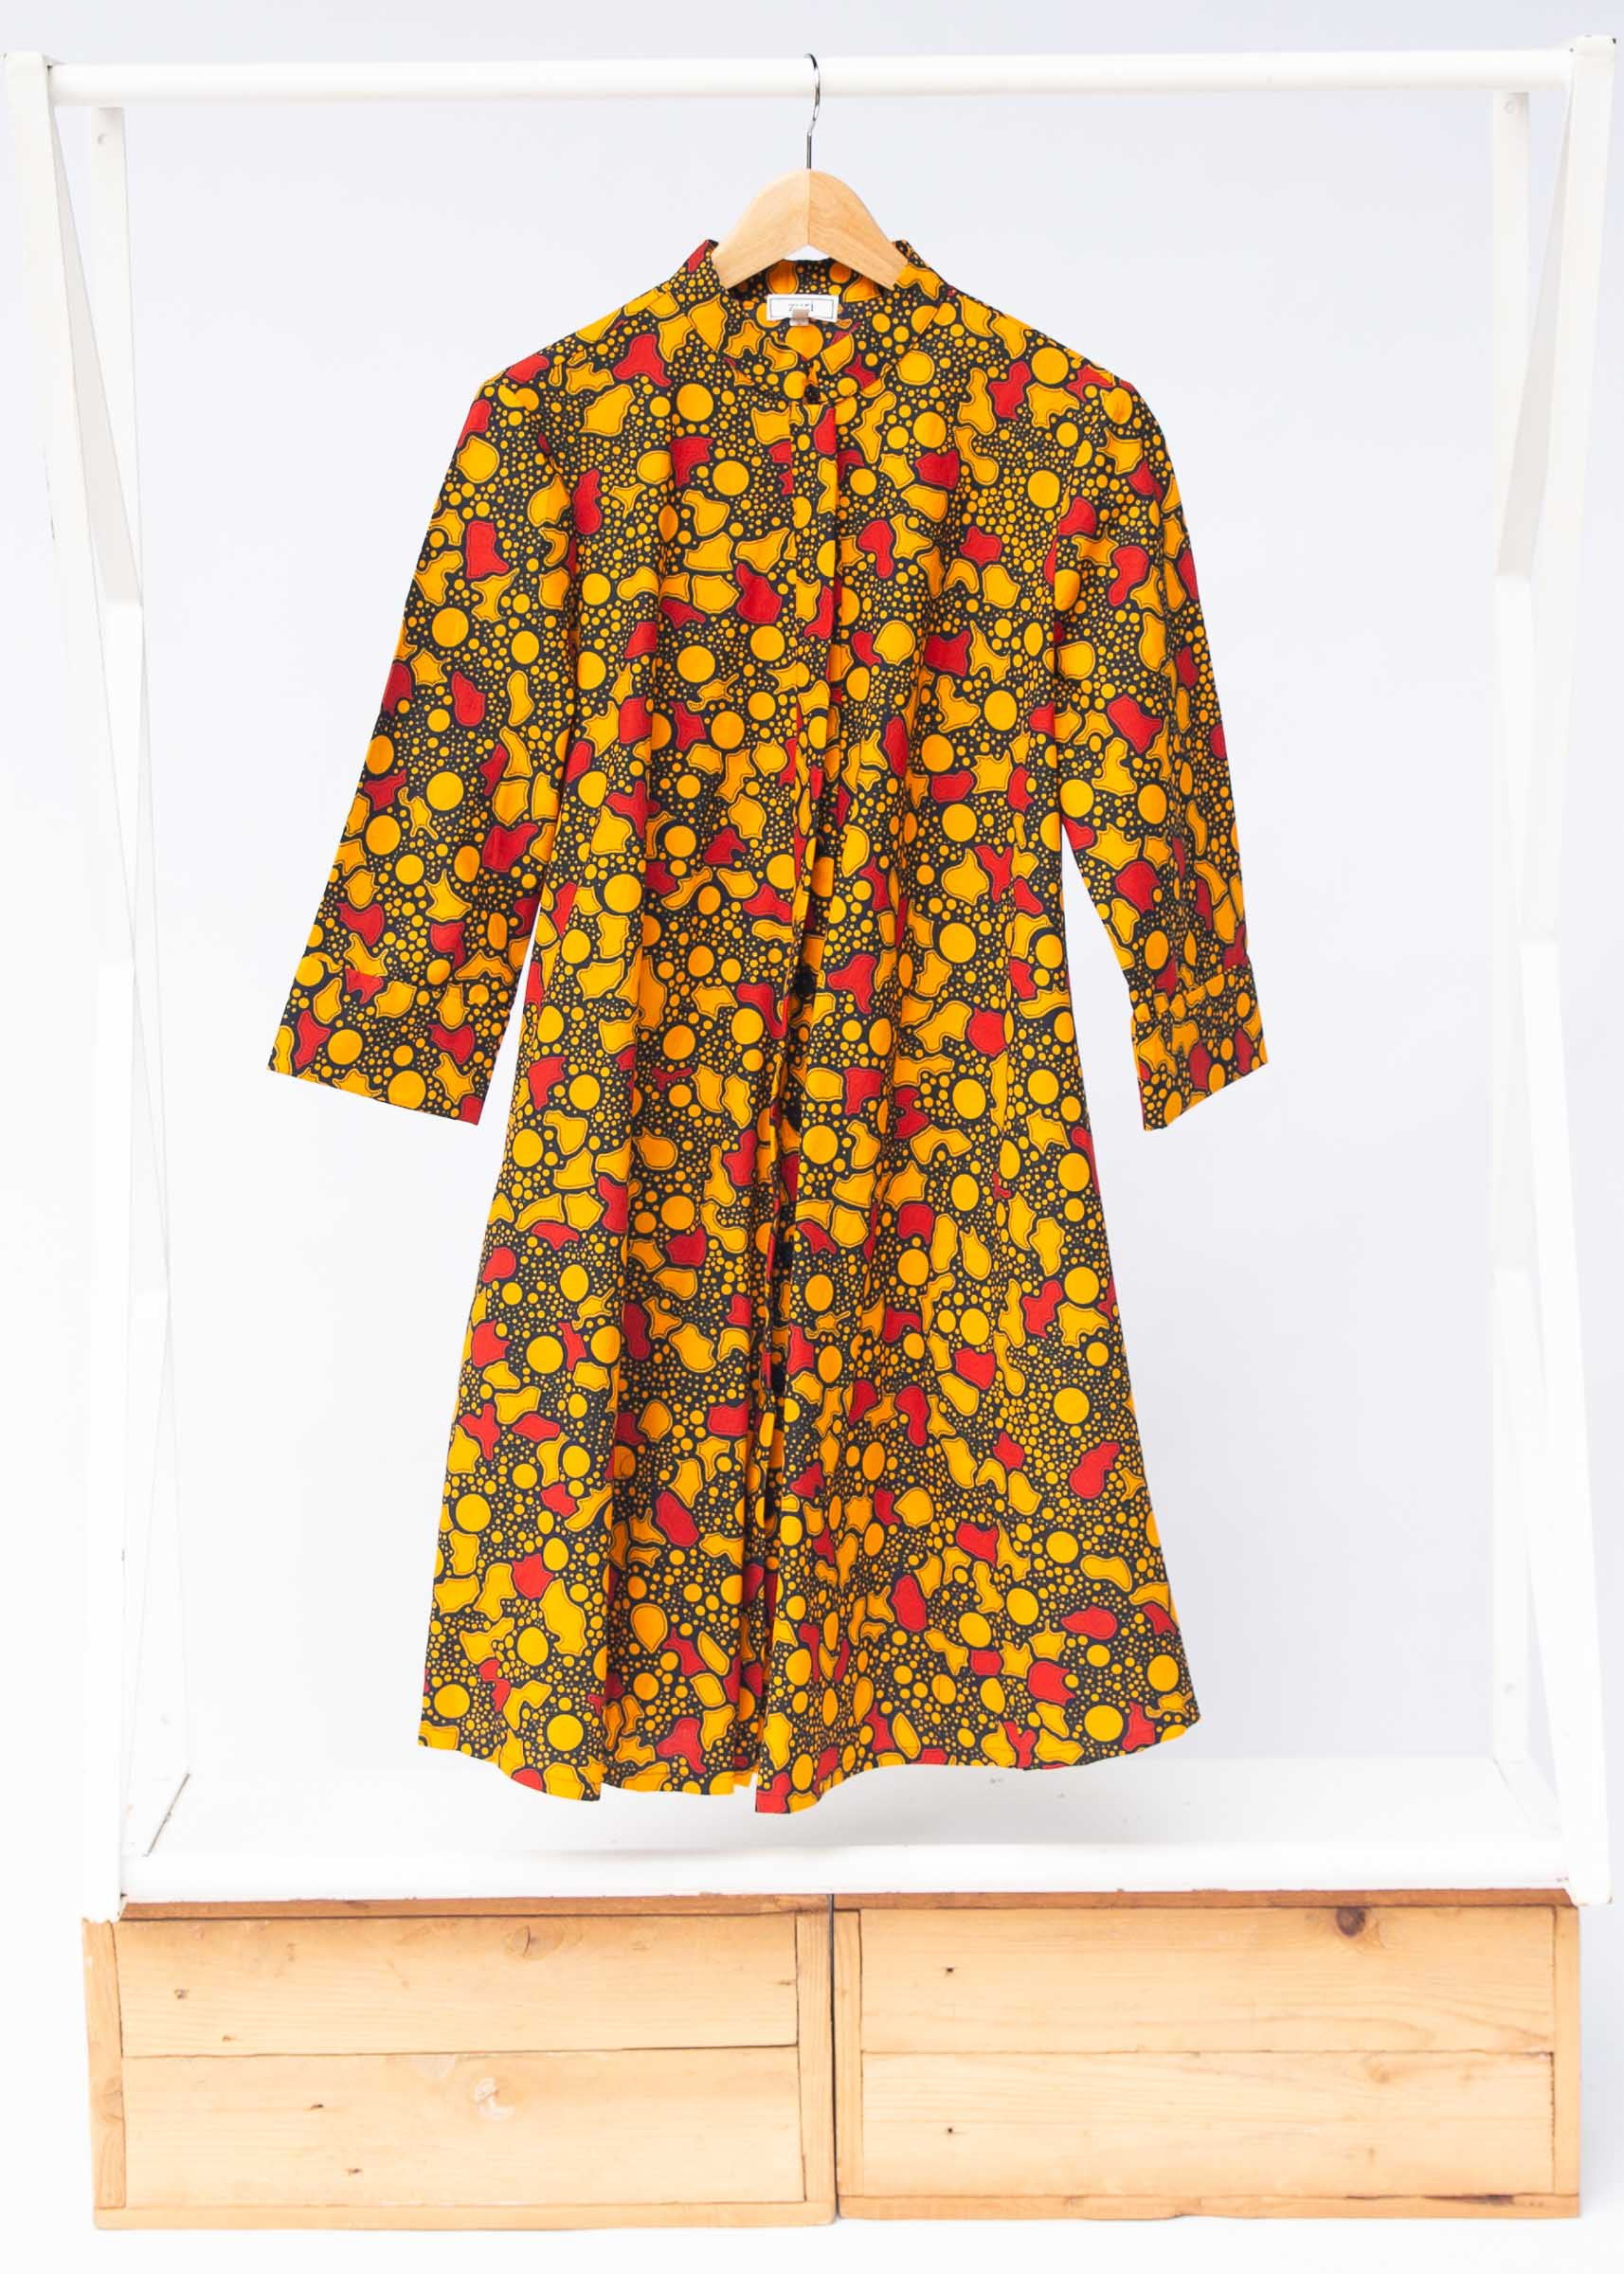 Display of black dress with yellow and red small blob print.